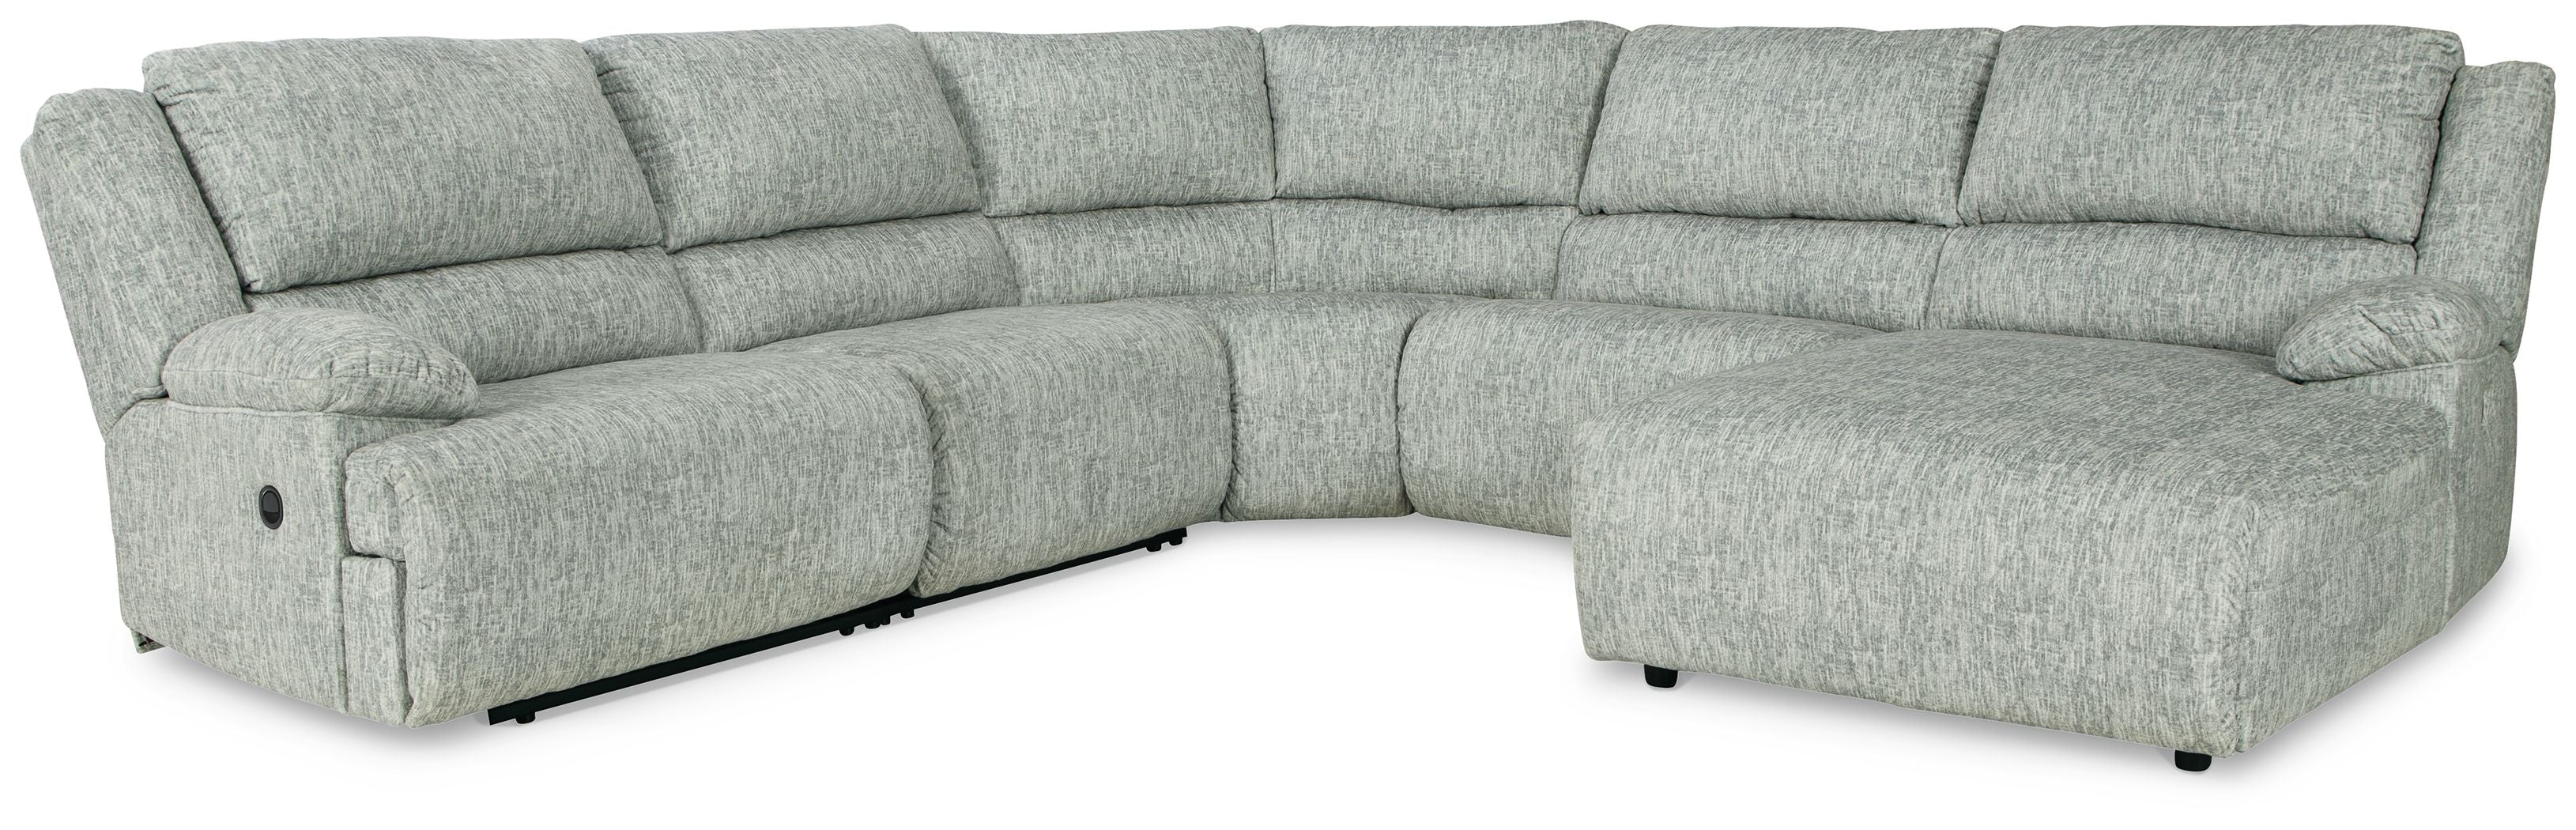 McClelland Gray Plush Sectional Sofa-Reclining Sectionals-American Furniture Outlet